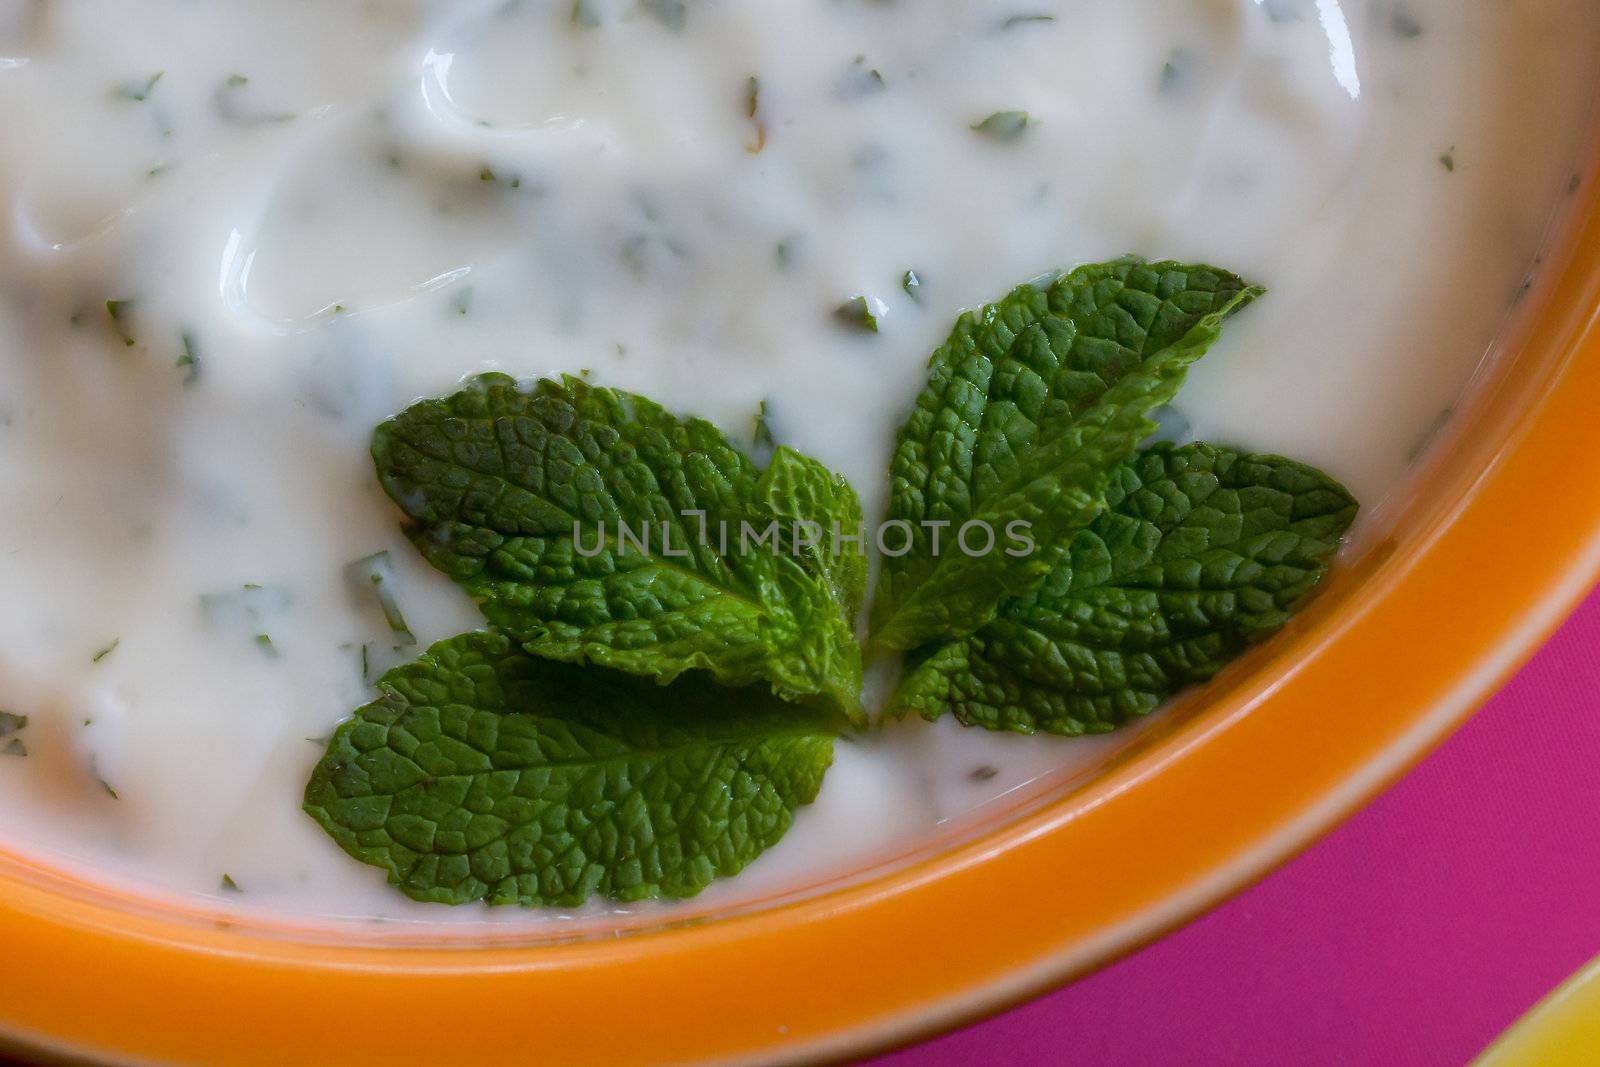 Fresh leaves of mint decorate the serving dish